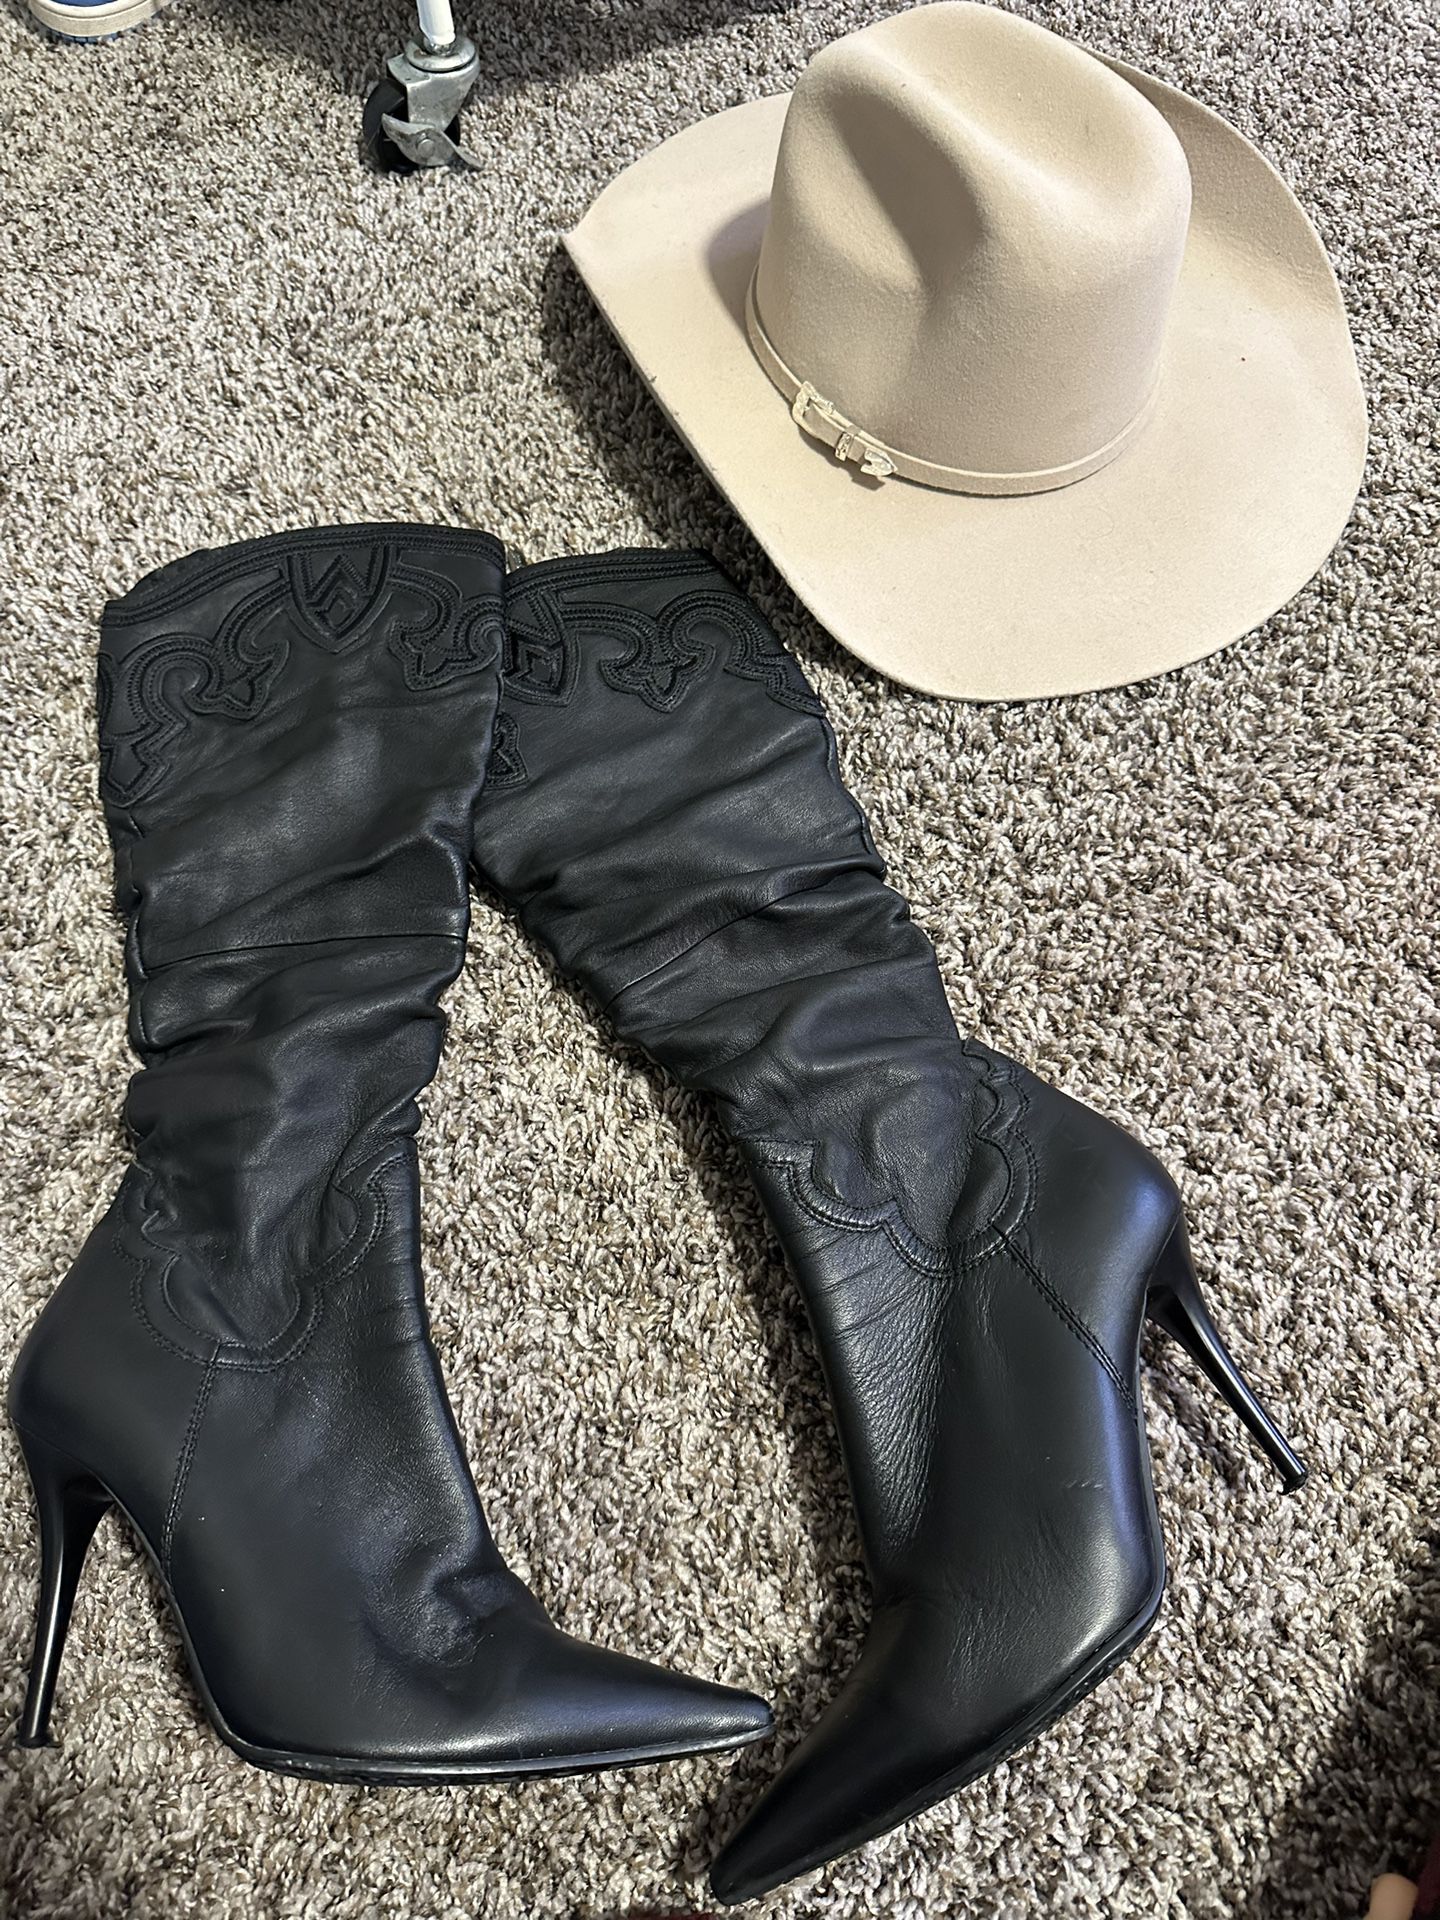 Cowboy Boots And Hat 